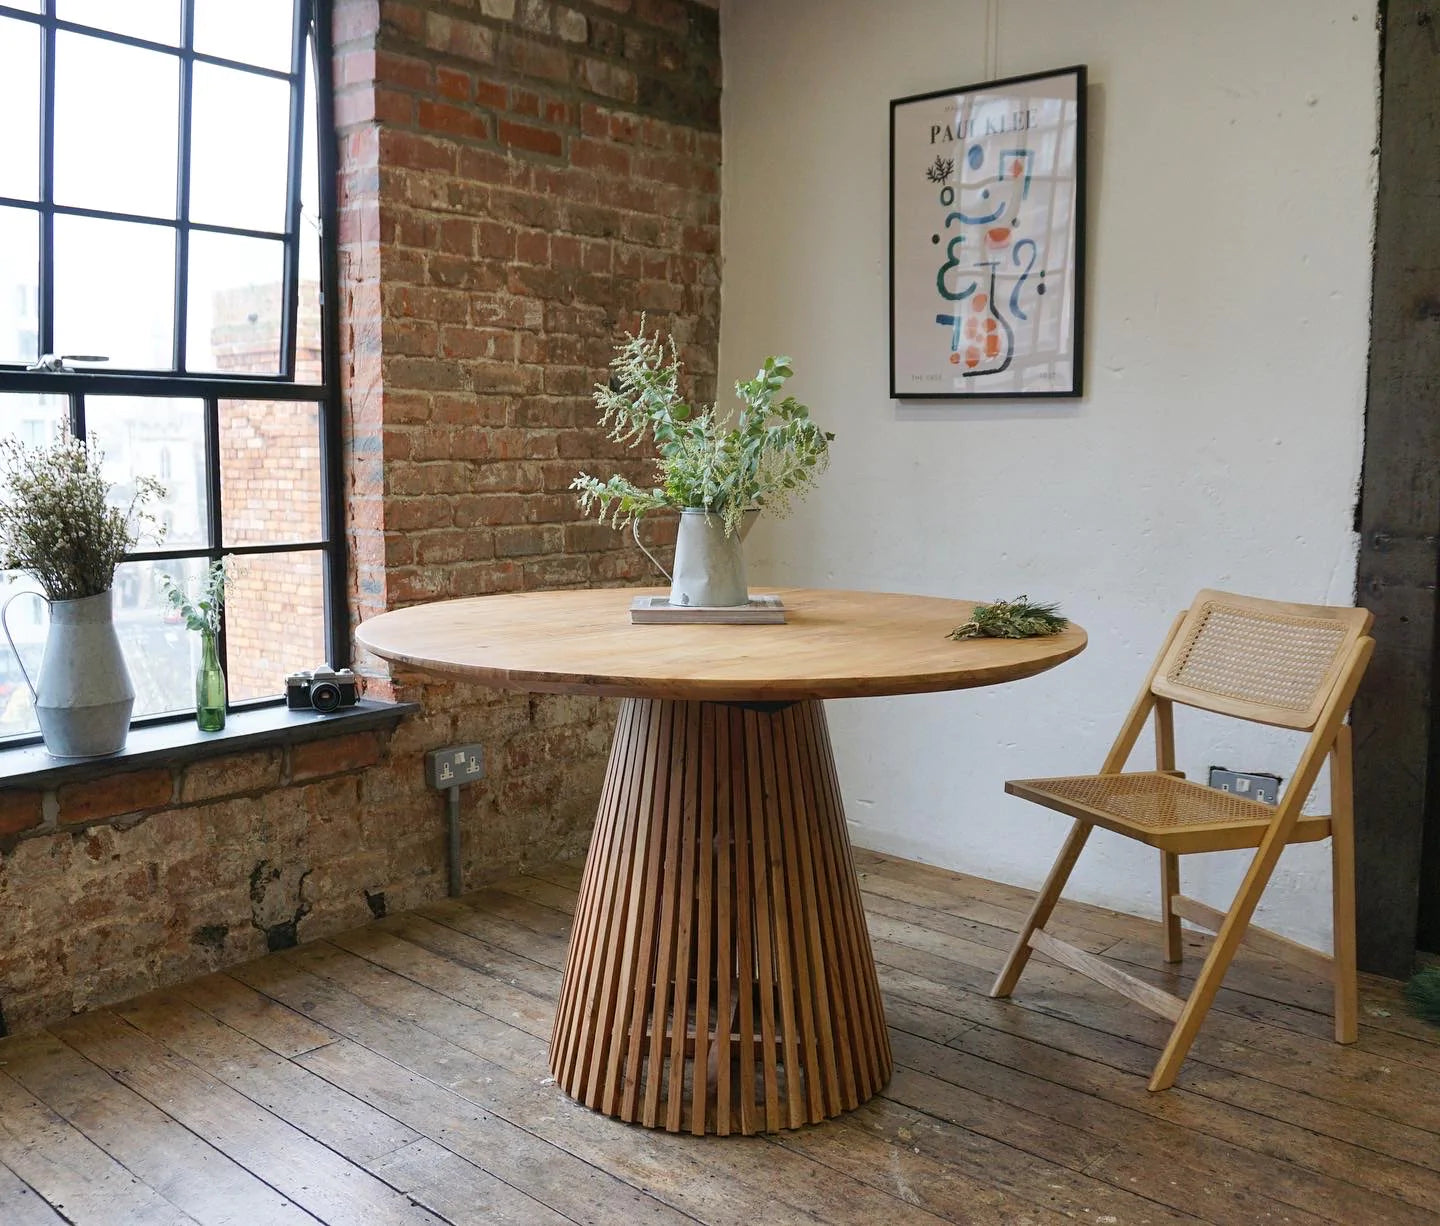 Minimalist Wooden Tables for a Simple Yet Sophisticated Look